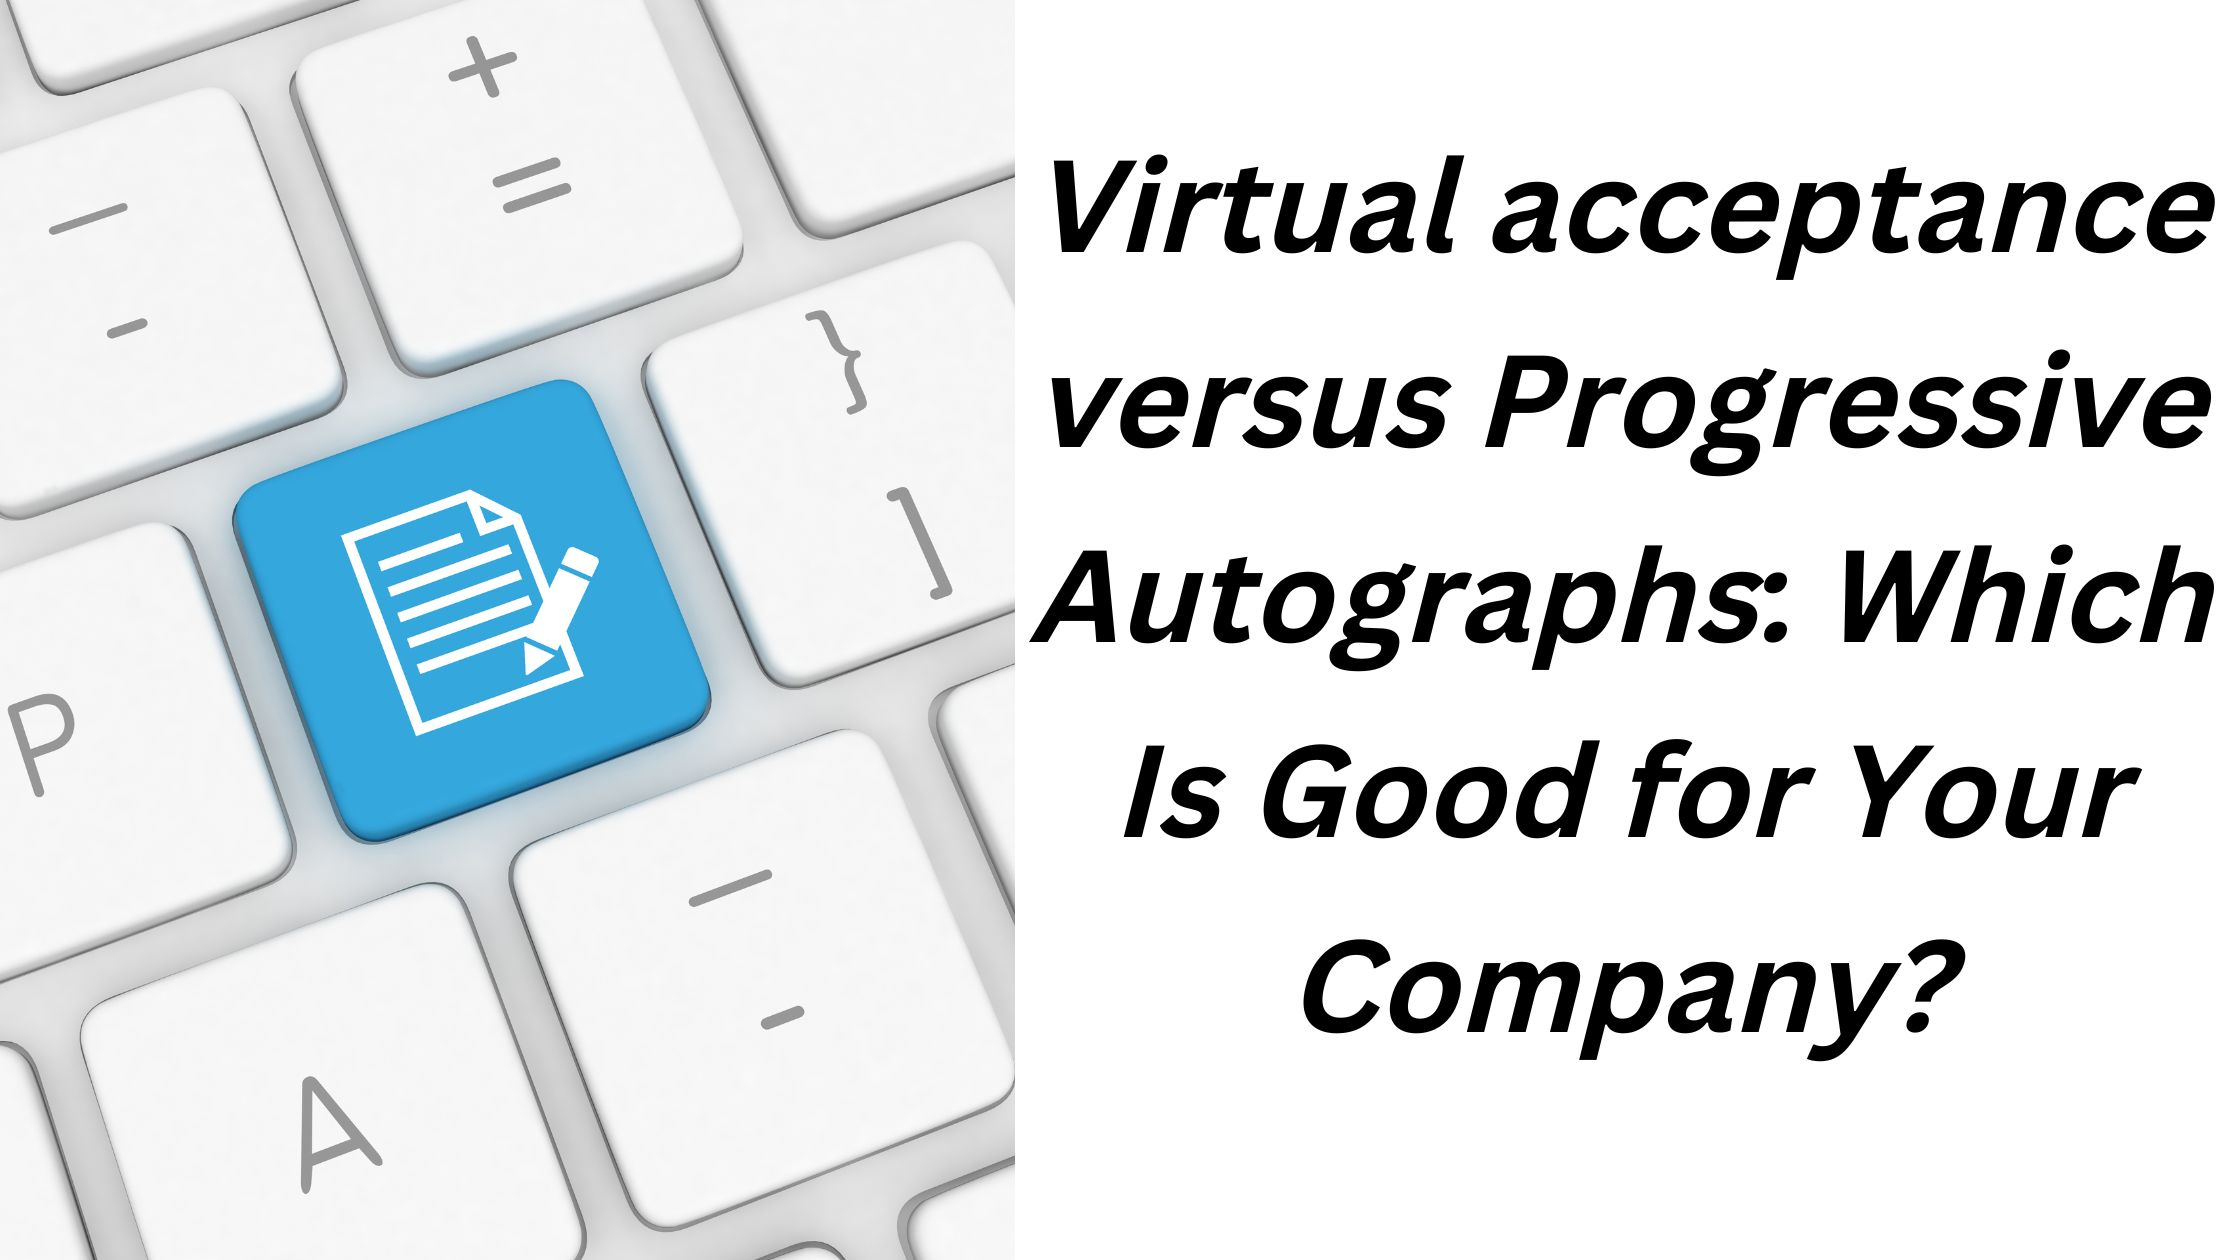 Virtual acceptance versus Progressive Autographs: Which Is Good for Your Company?